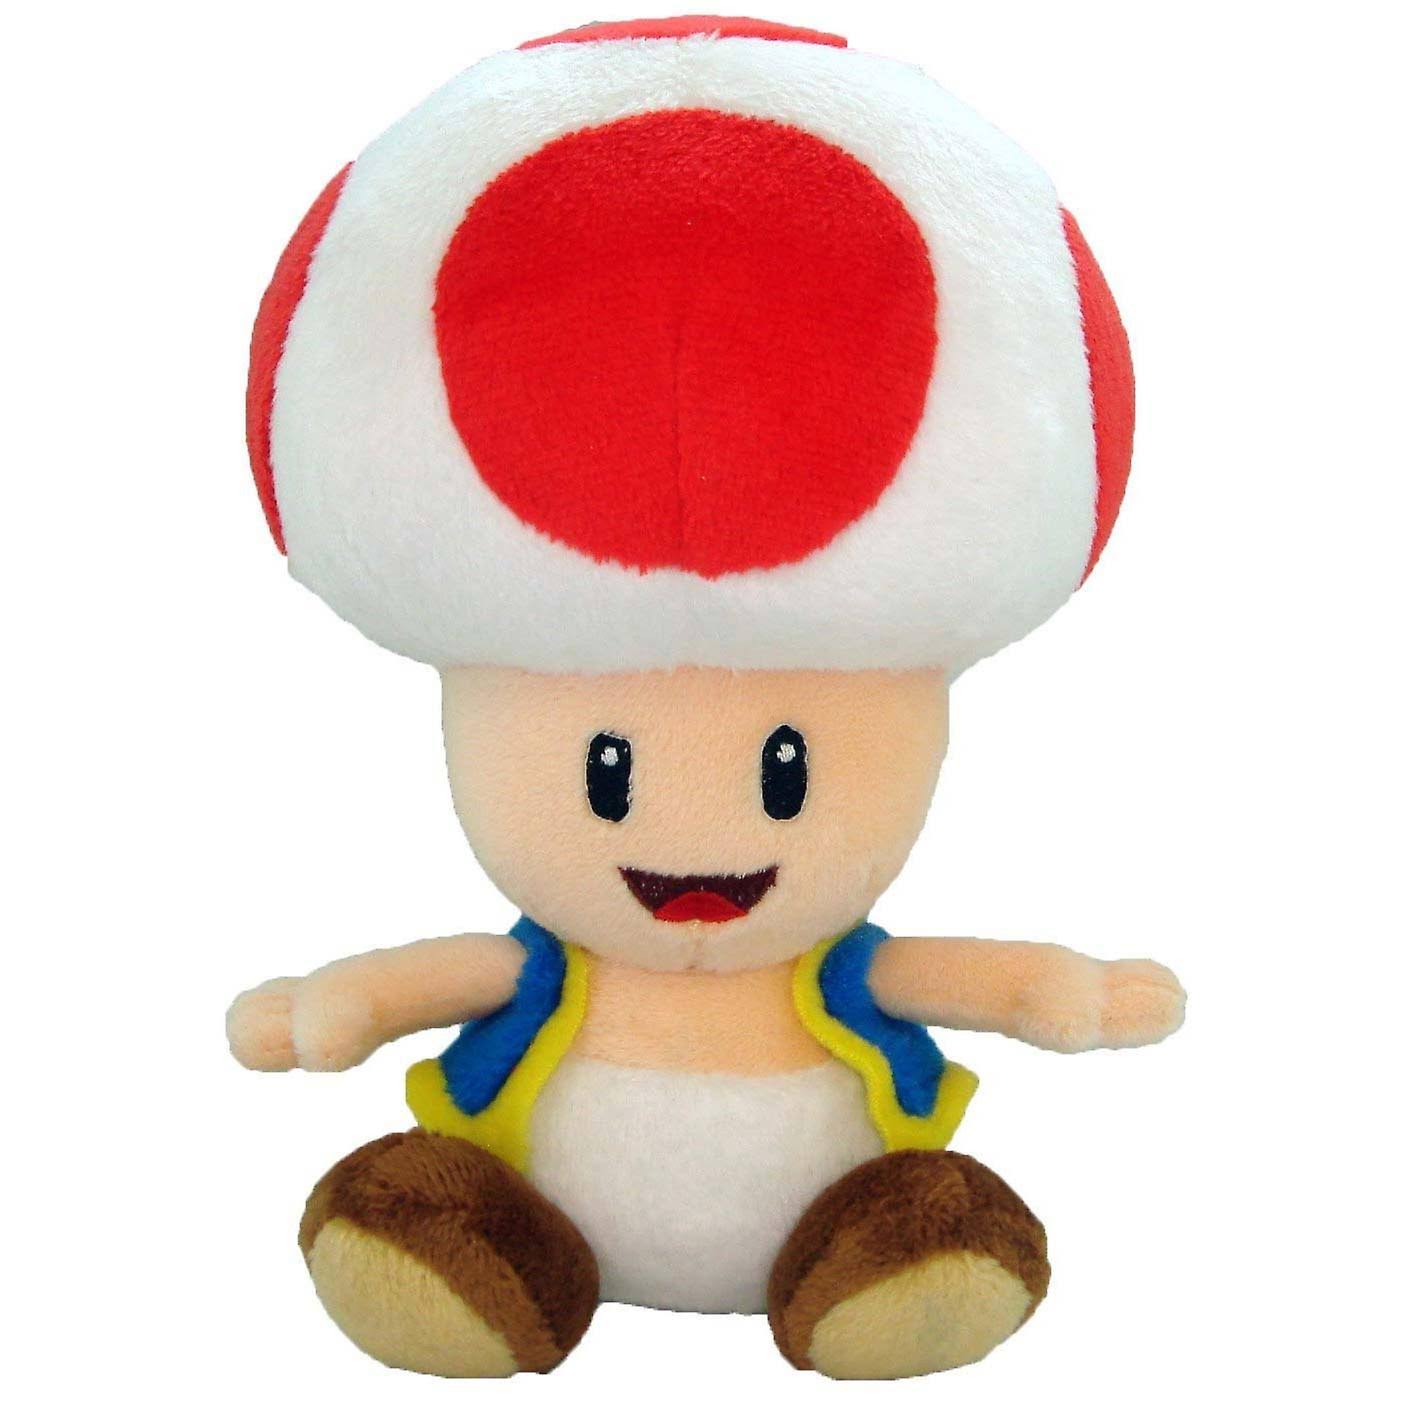 Little Buddy Super Mario Plush Toy - Toad, 8"